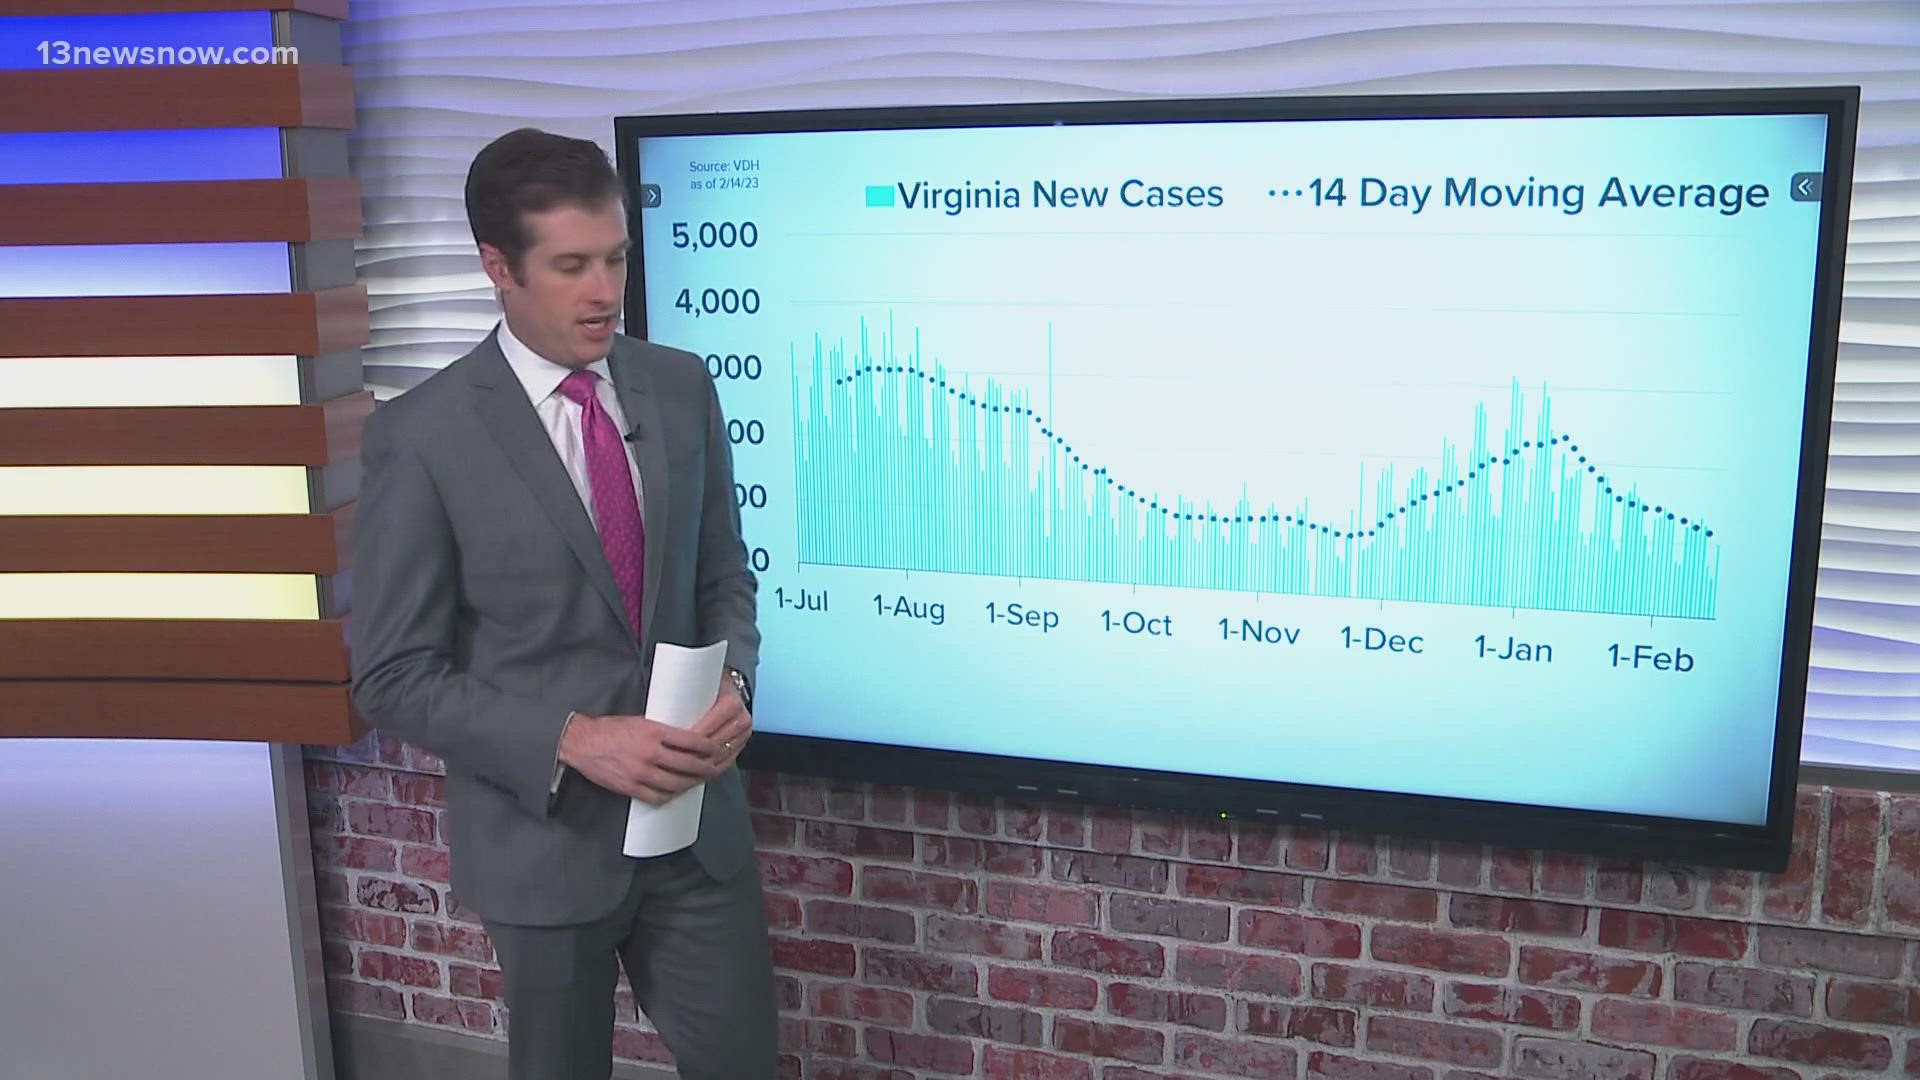 The latest data from the Virginia Department of Health is showing positive news.